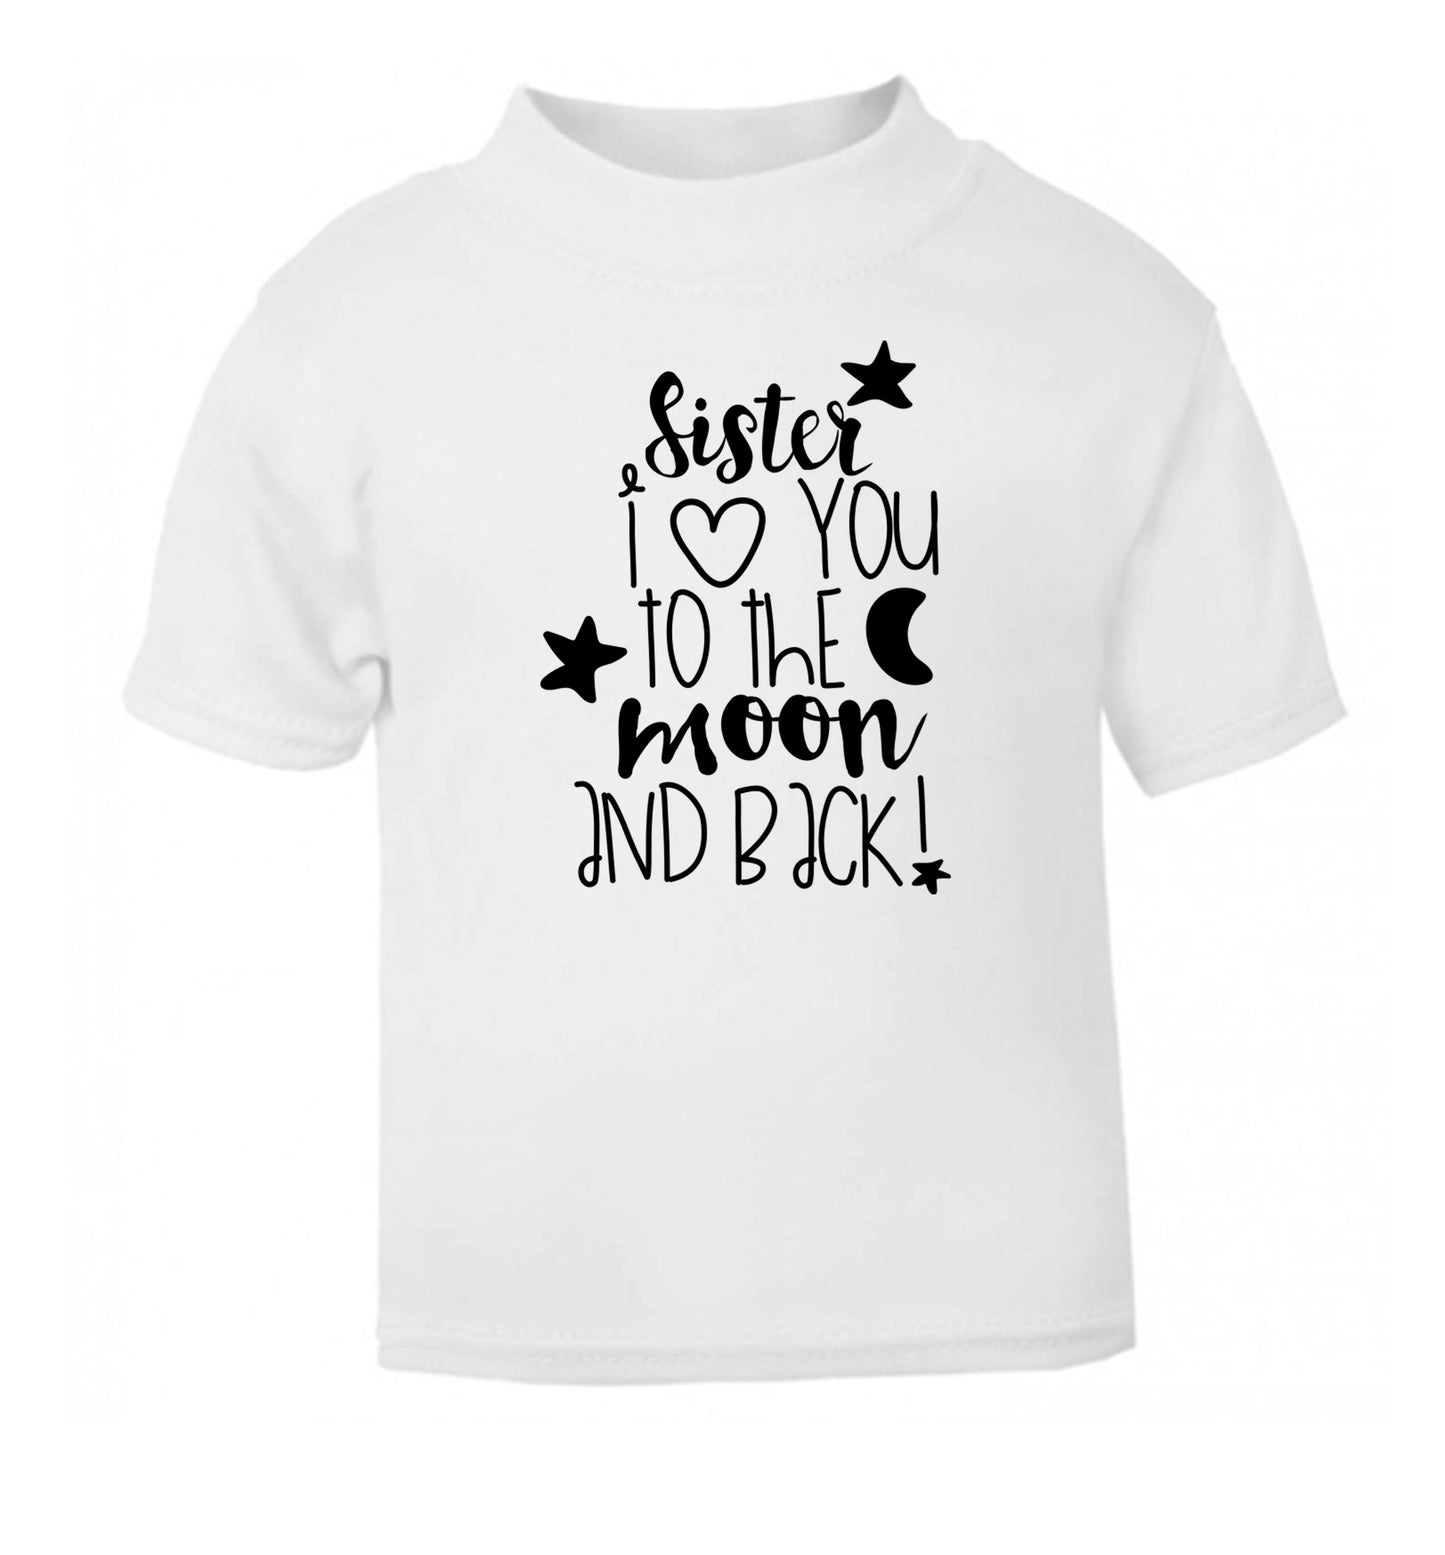 Sister I love you to the moon and back white Baby Toddler Tshirt 2 Years